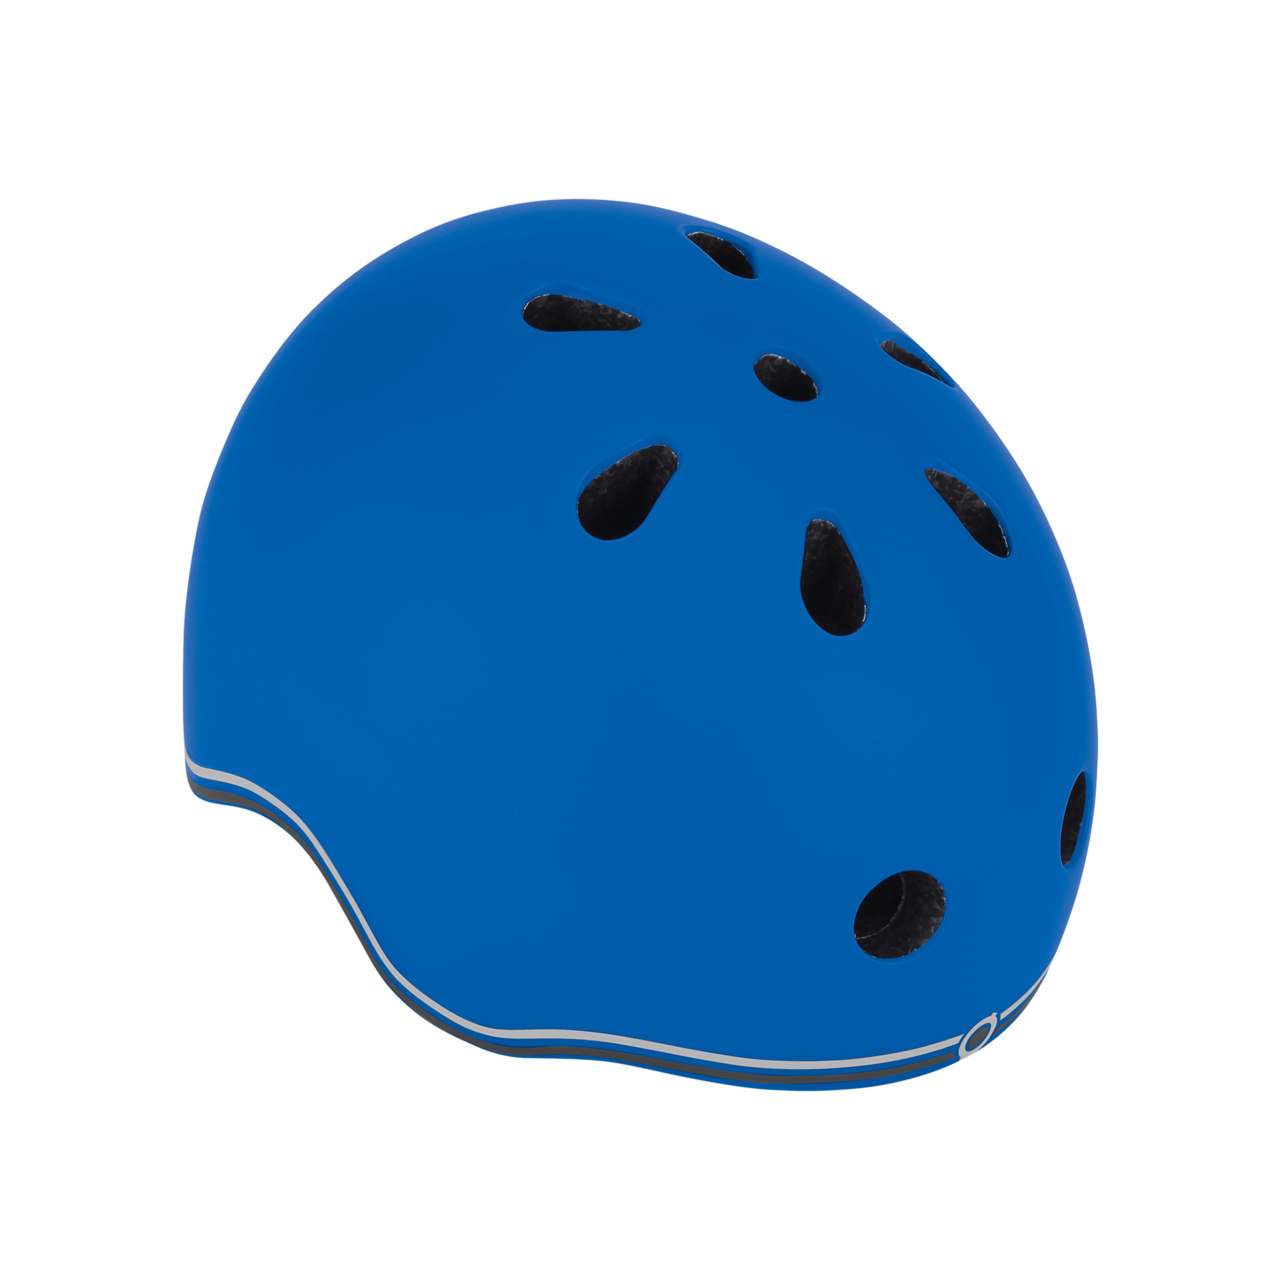 506 100 Cool Scooter Helmets For Kids